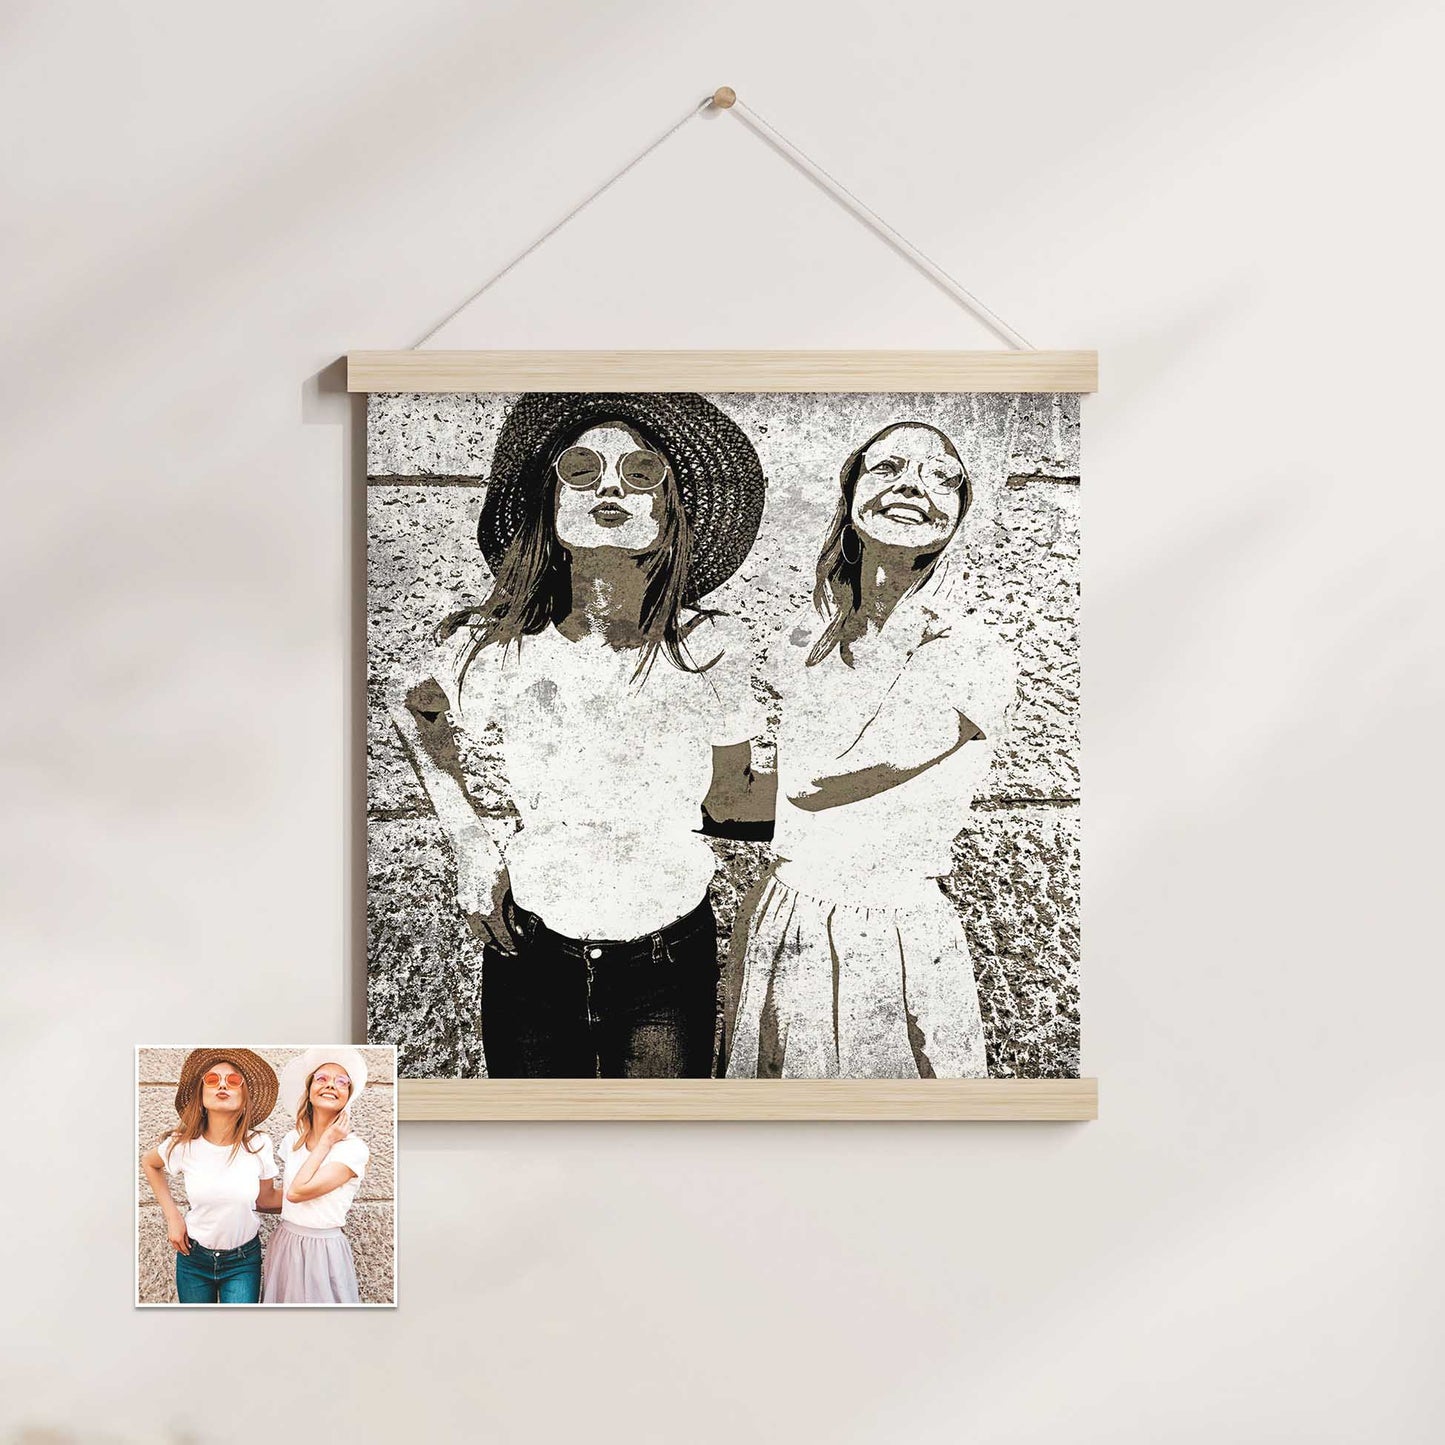 Experience the allure of street art with our Personalised Black & White Street Art Poster Hanger. Printed from your photo, it showcases a realistic street art style that adds an urban vibe to your space